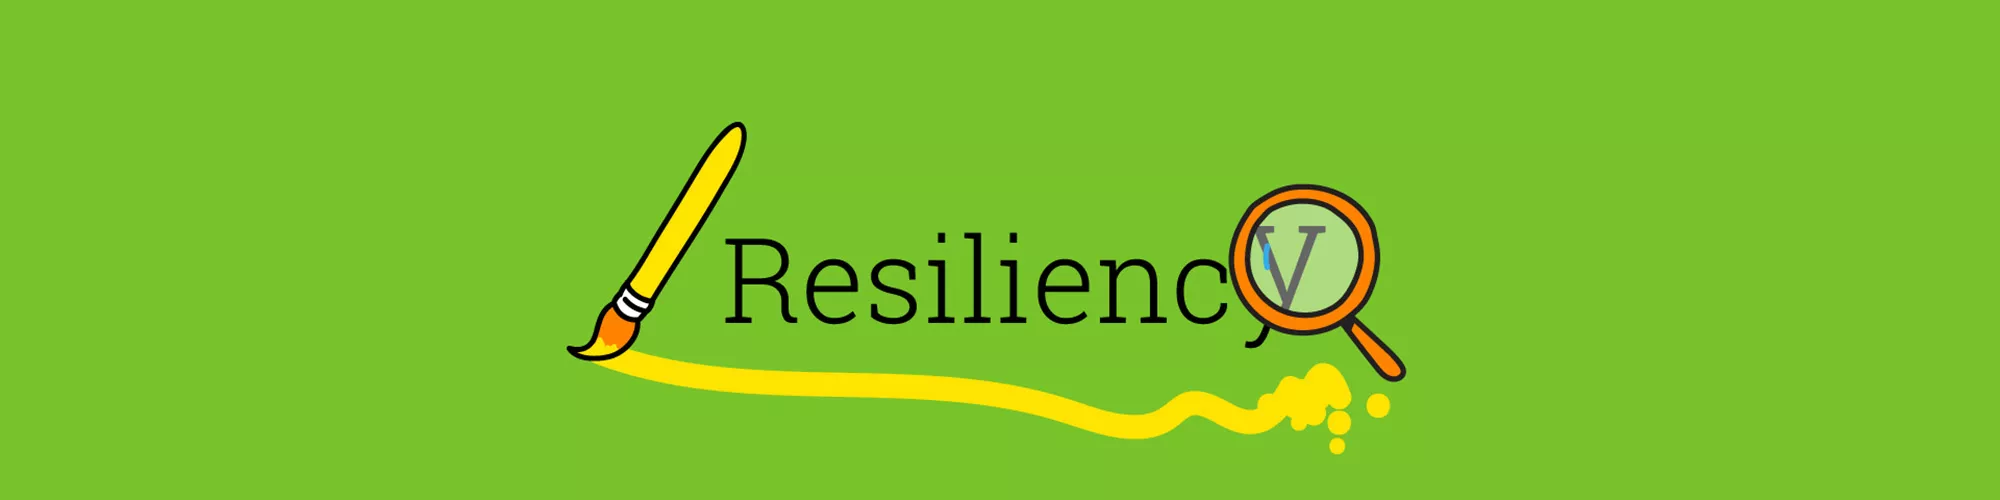 Hero image for the The art and science of resiliency page